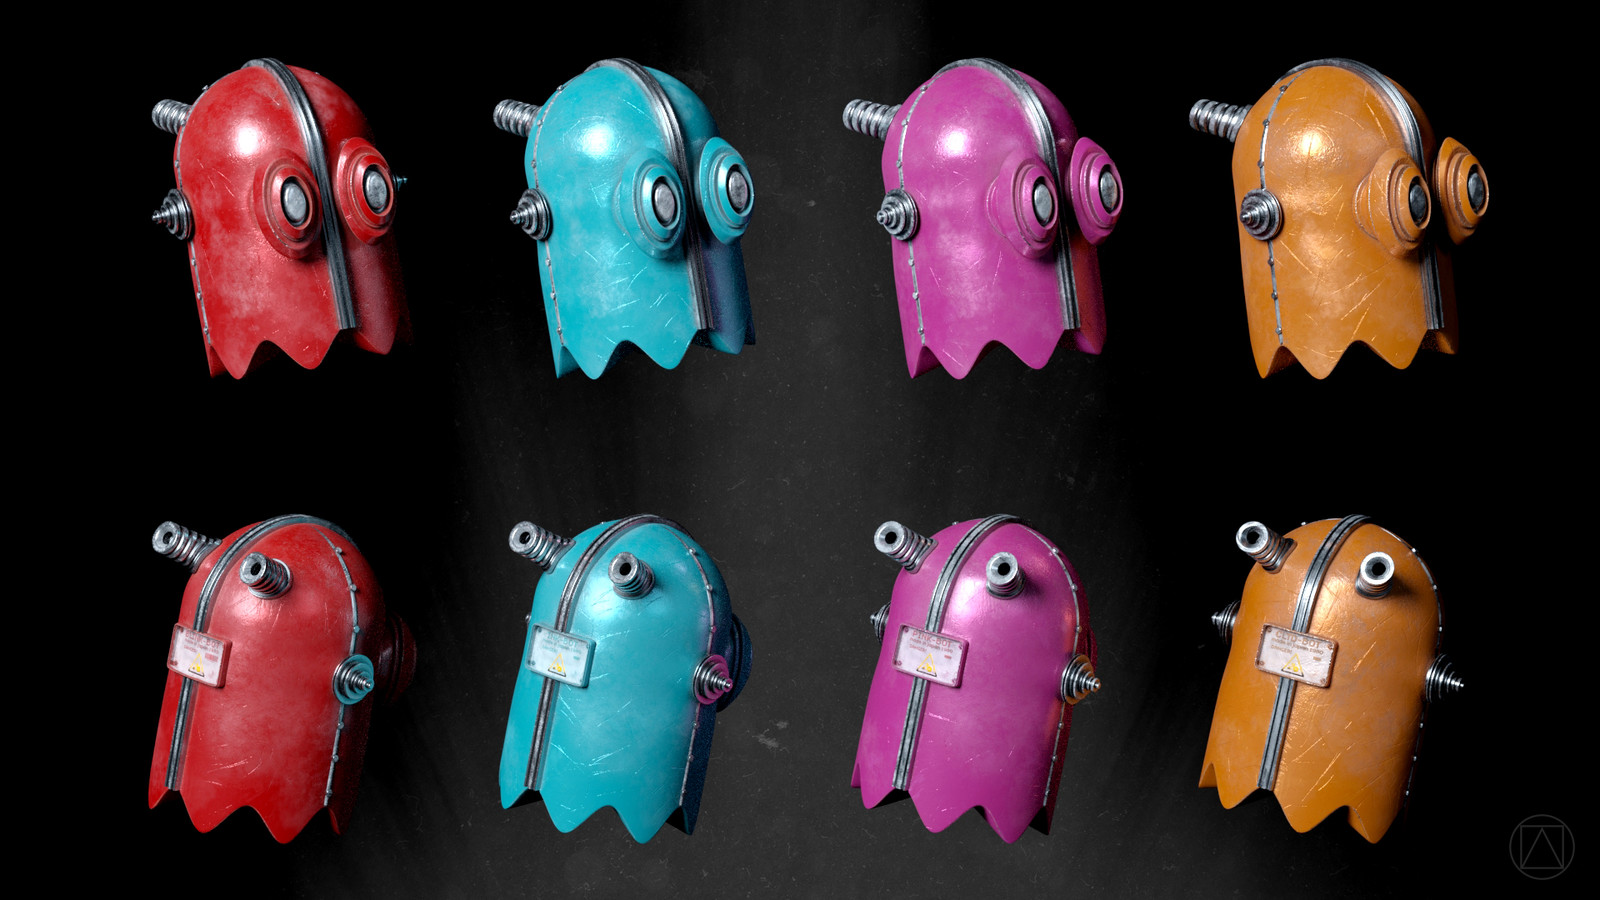 The robot ghosts: Blink-bot, Ink-bot, Pink-bot and Clyd-bot